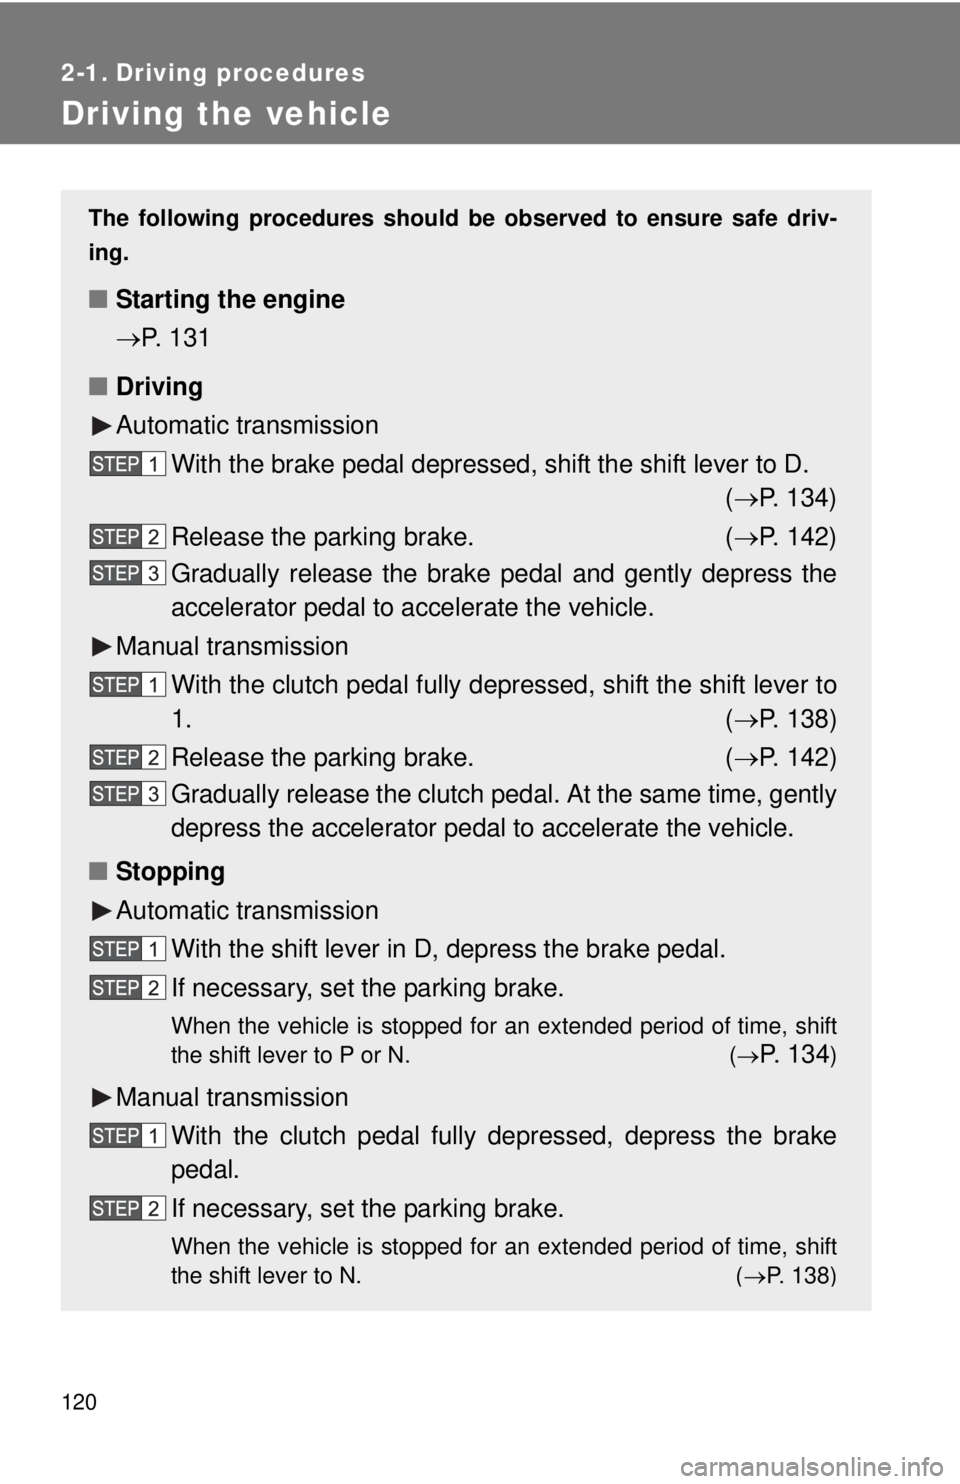 TOYOTA TACOMA 2015  Owners Manual (in English) 120
2-1. Driving procedures
Driving the vehicle
The following procedures should be observed to ensure safe driv-
ing.
■ Starting the engine 
P. 131
■ Driving
Automatic transmission
With the bra